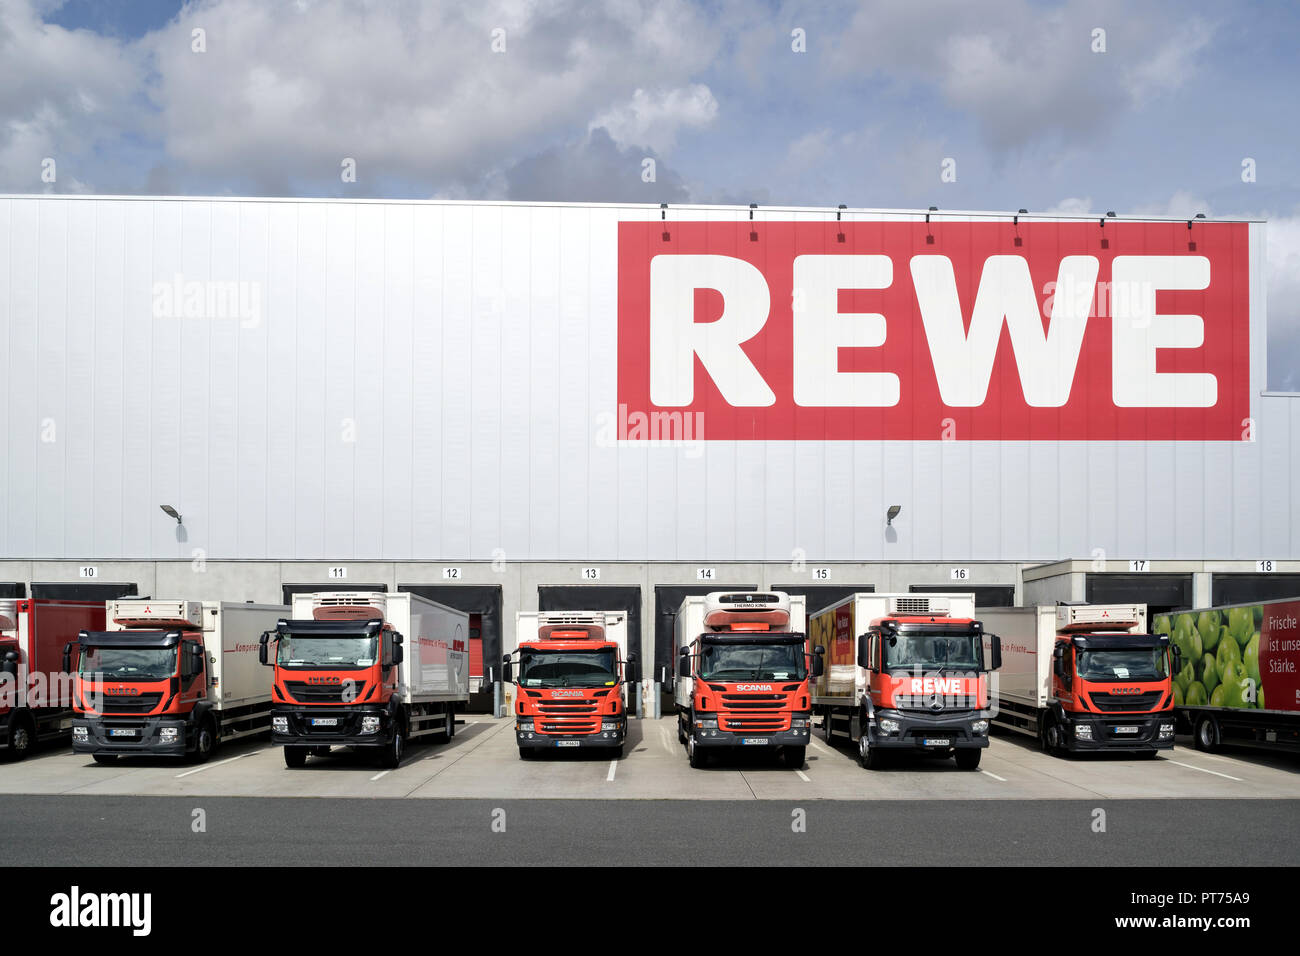 Trucks at REWE distribution center. REWE operates approximately 3,300 supermarkets in Germany. Stock Photo